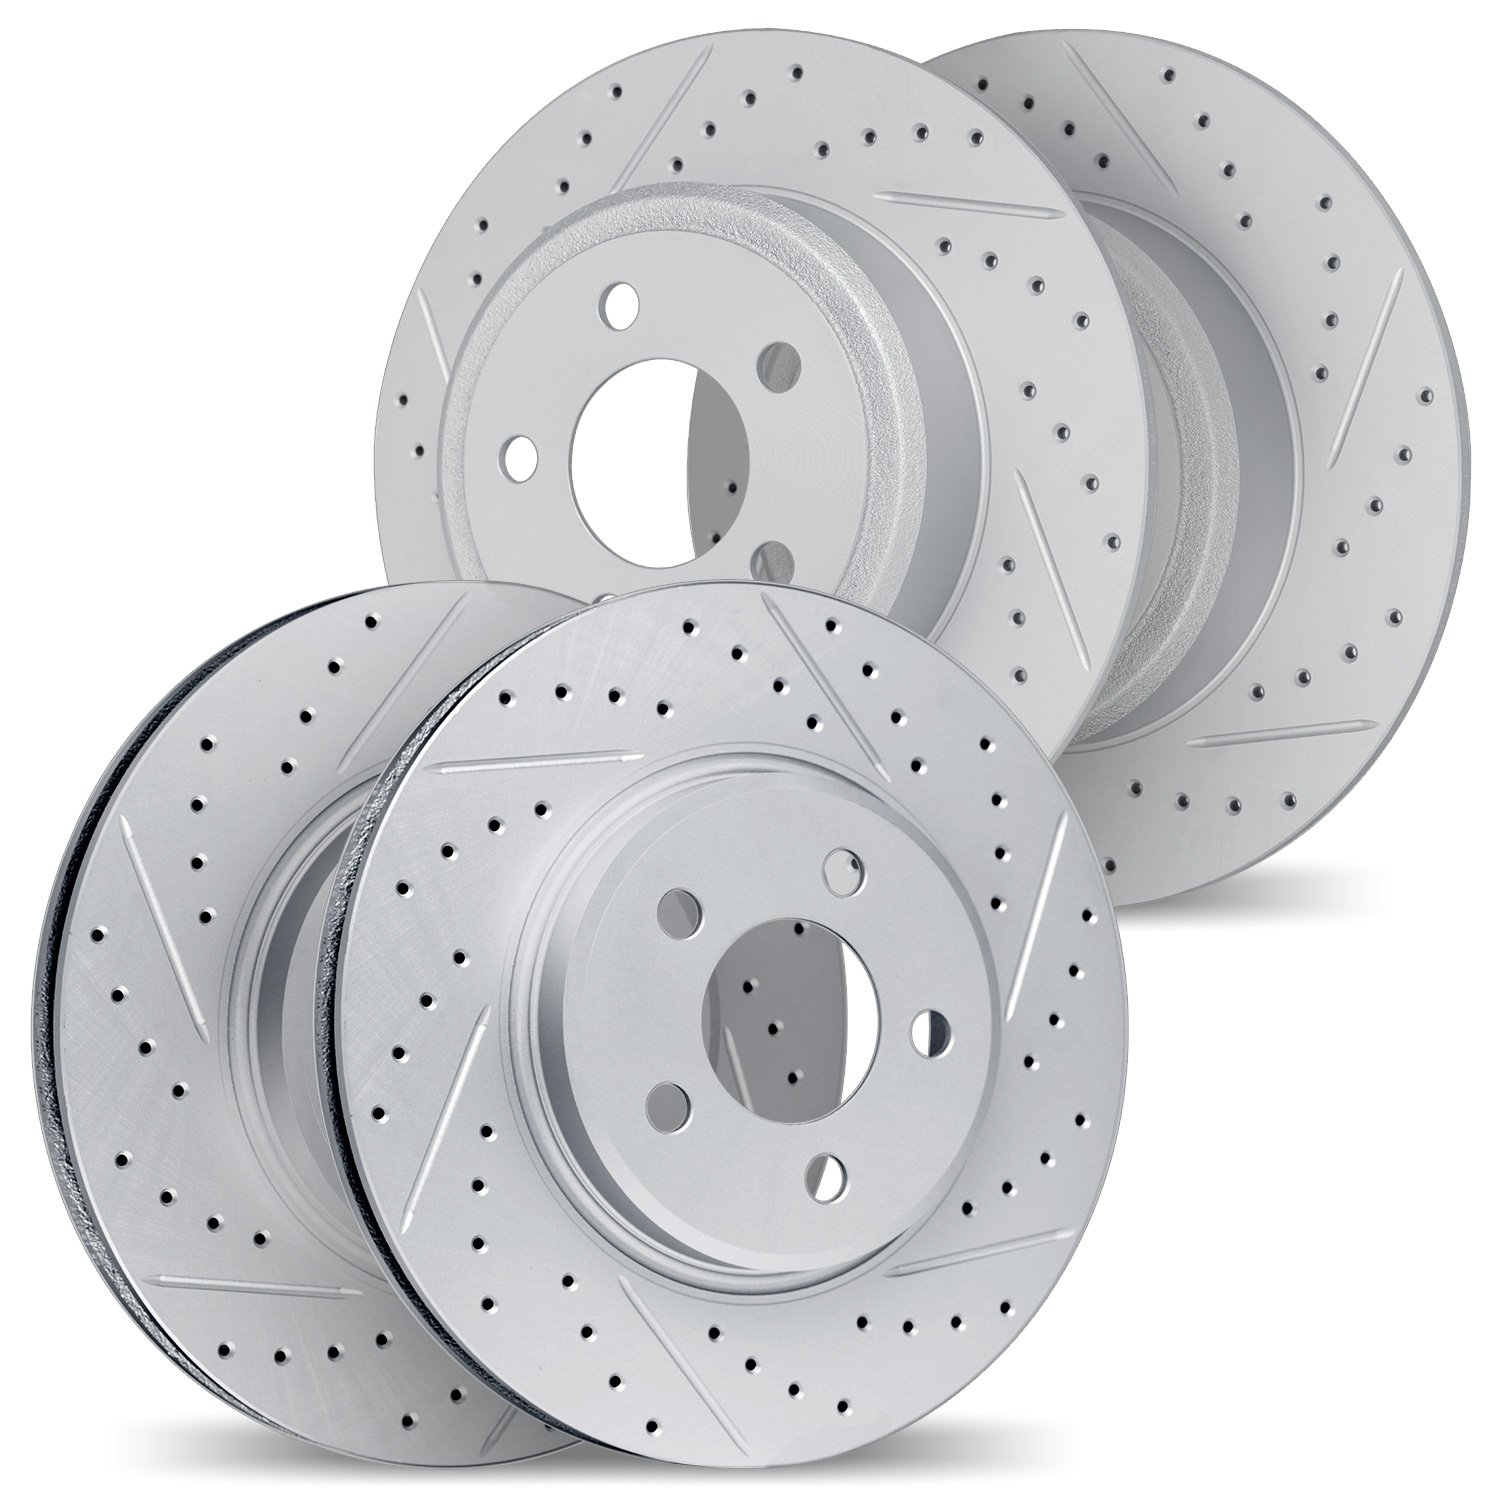 2004-47049 Geoperformance Drilled/Slotted Brake Rotors, 2005-2005 GM, Position: Front and Rear